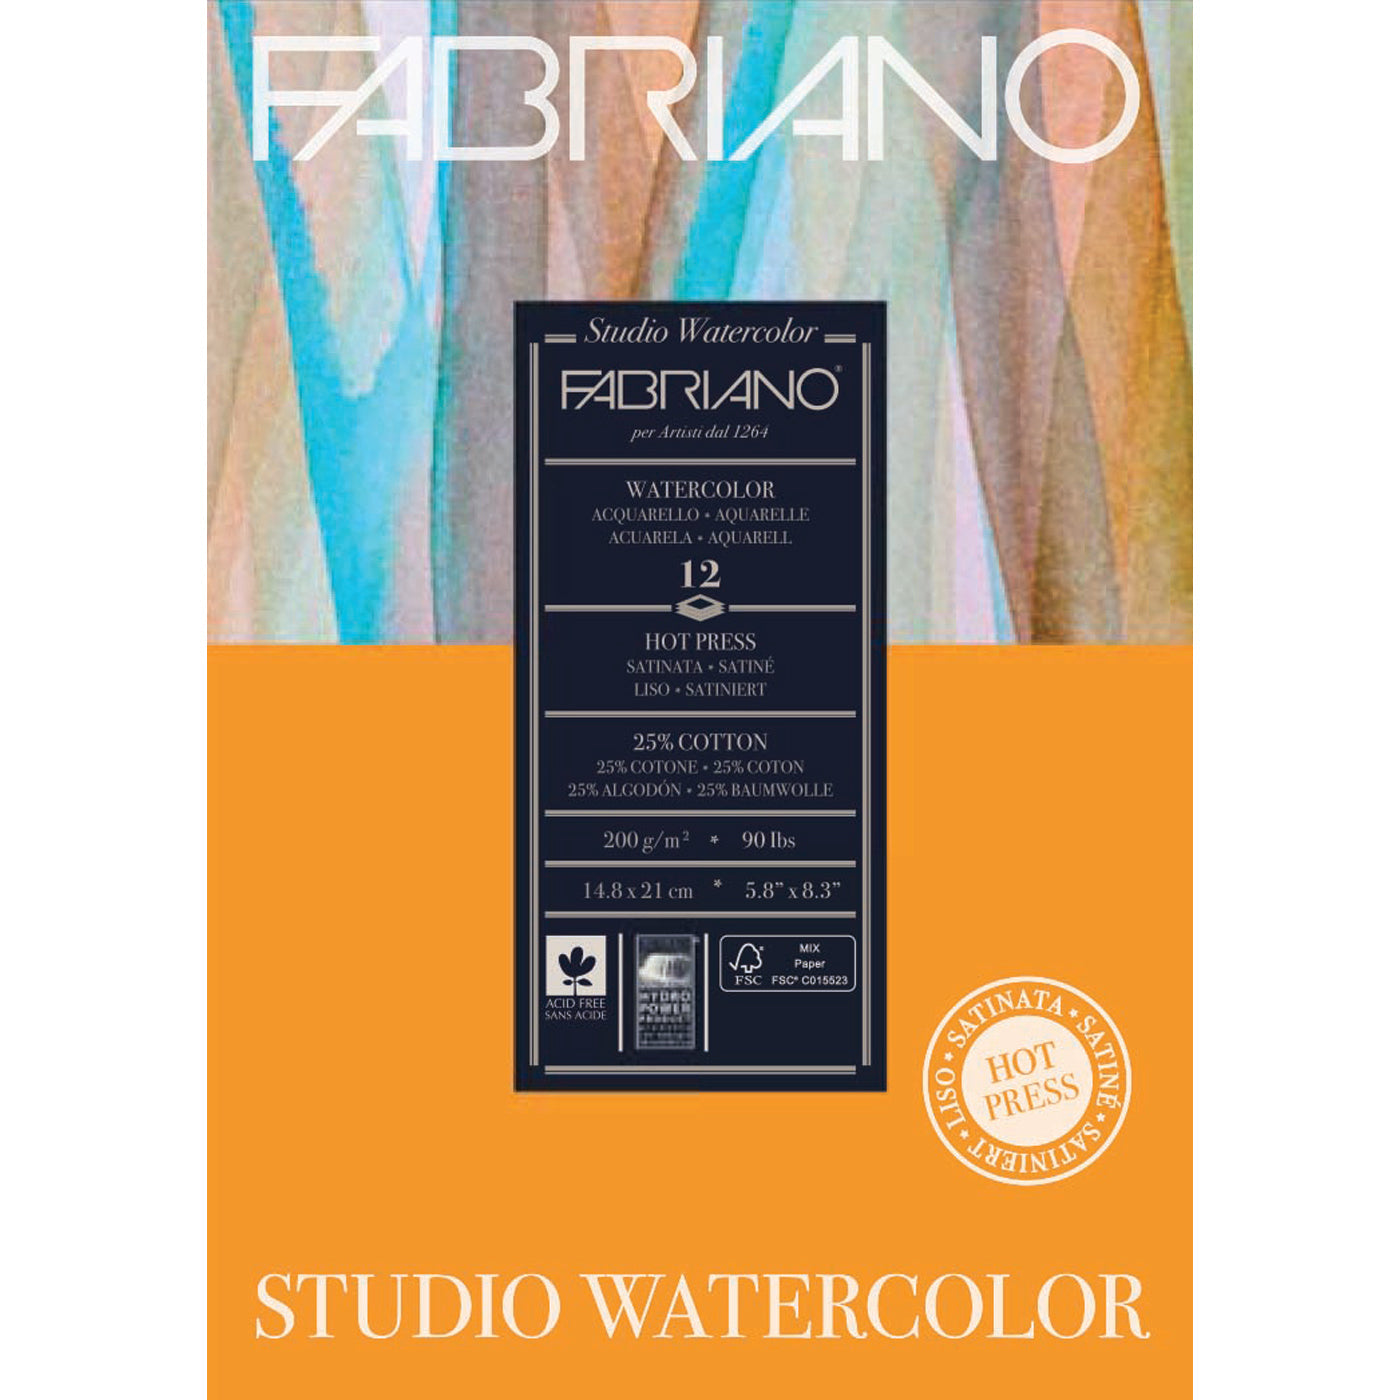 FABRIANO STUDIO WATERCOLOUR HOT PRESSED PAPER PAD 200GSM 12 SHEETS